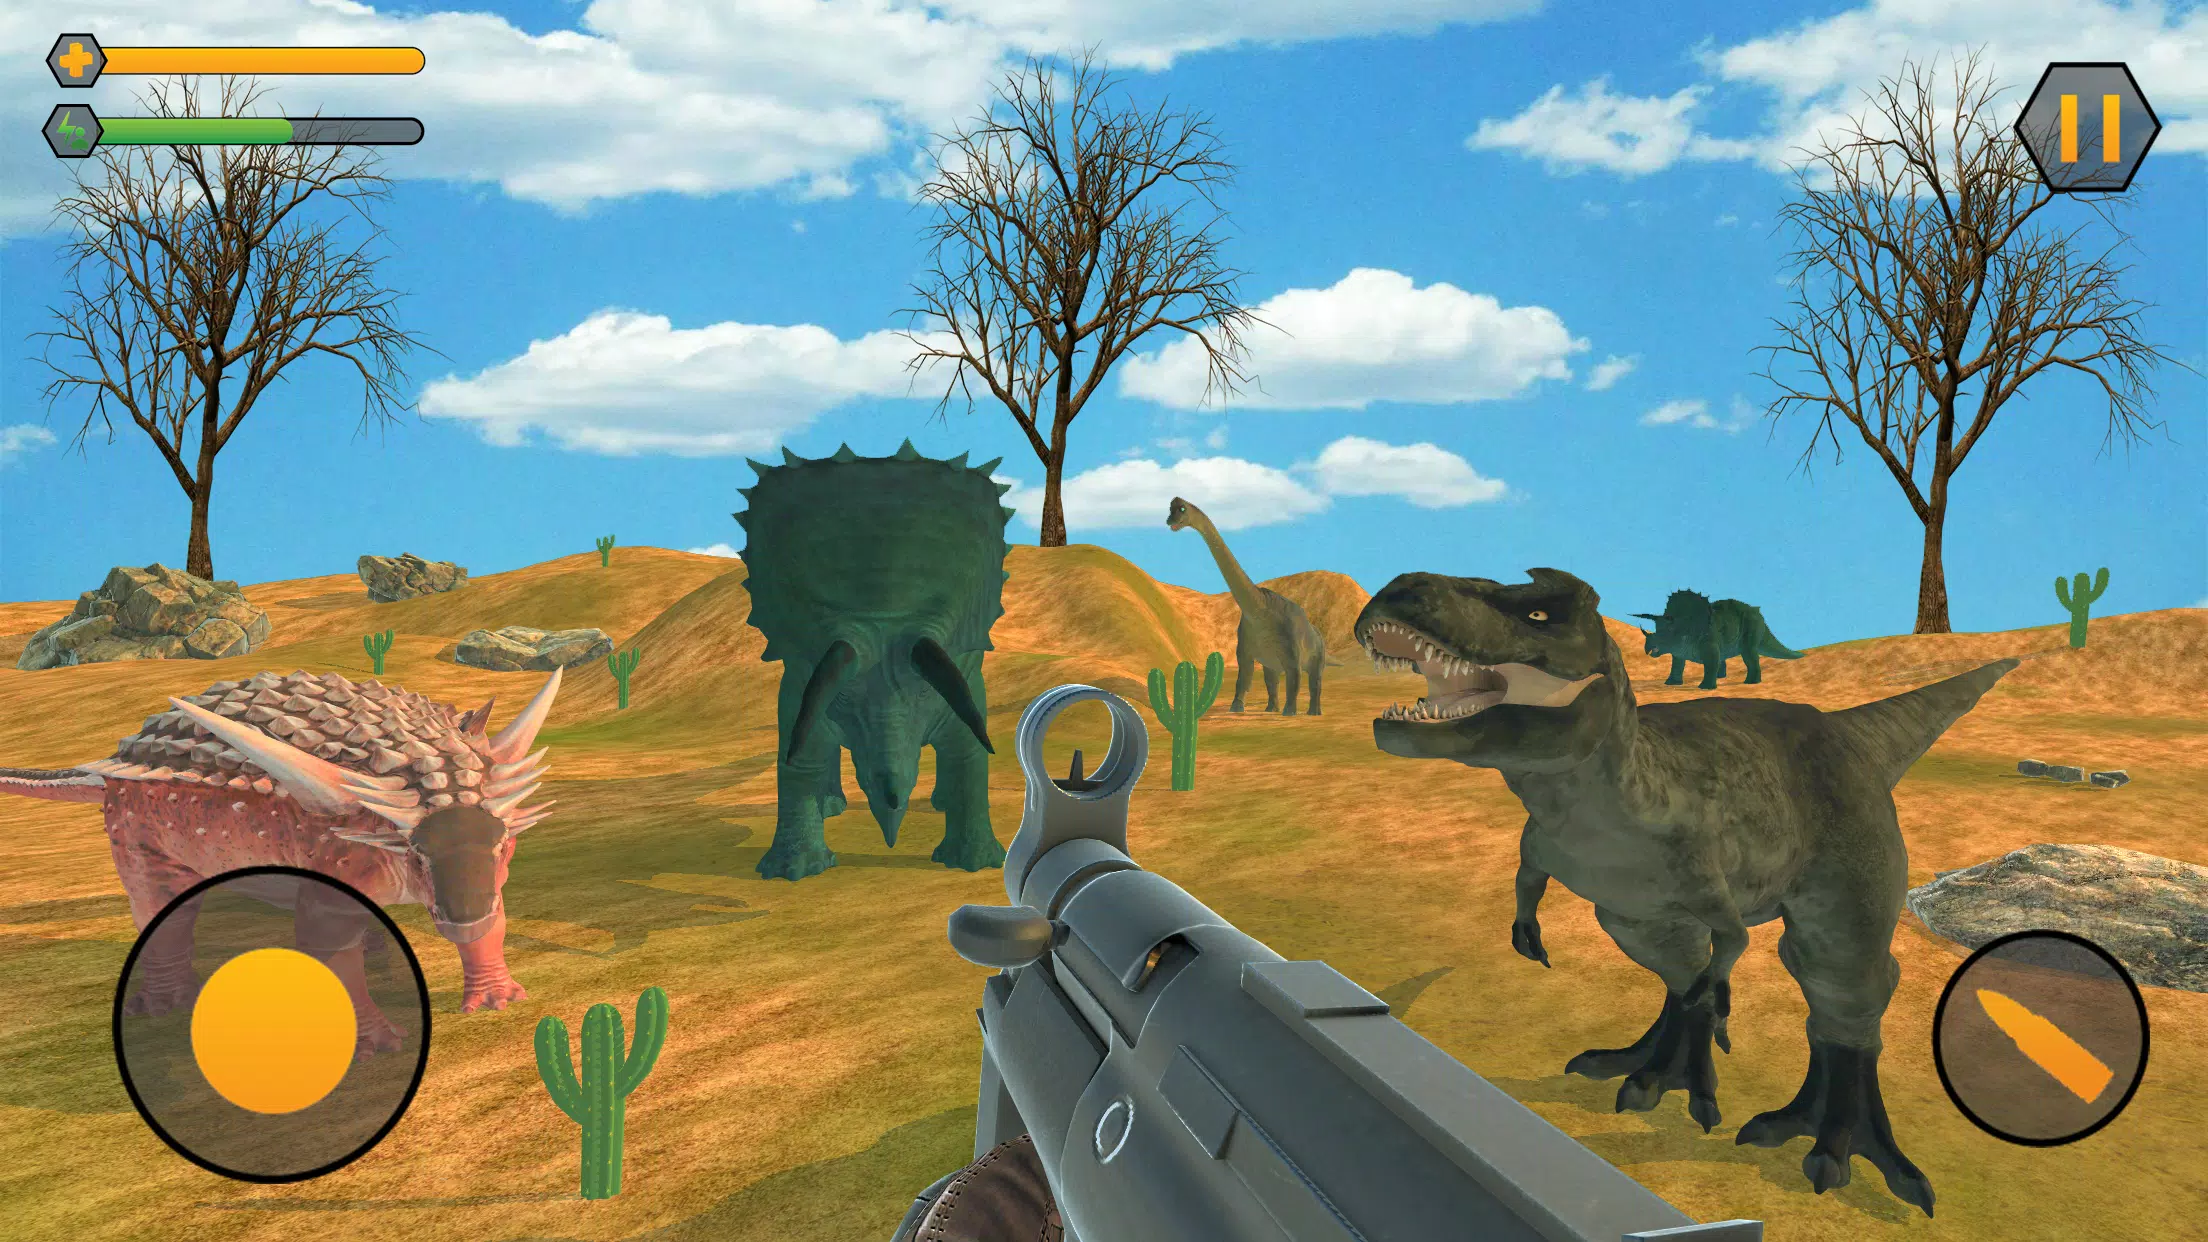 Dinosaur Park: Primeval Zoo, the dino park tycoon game, is out now on iOS  following success on Android